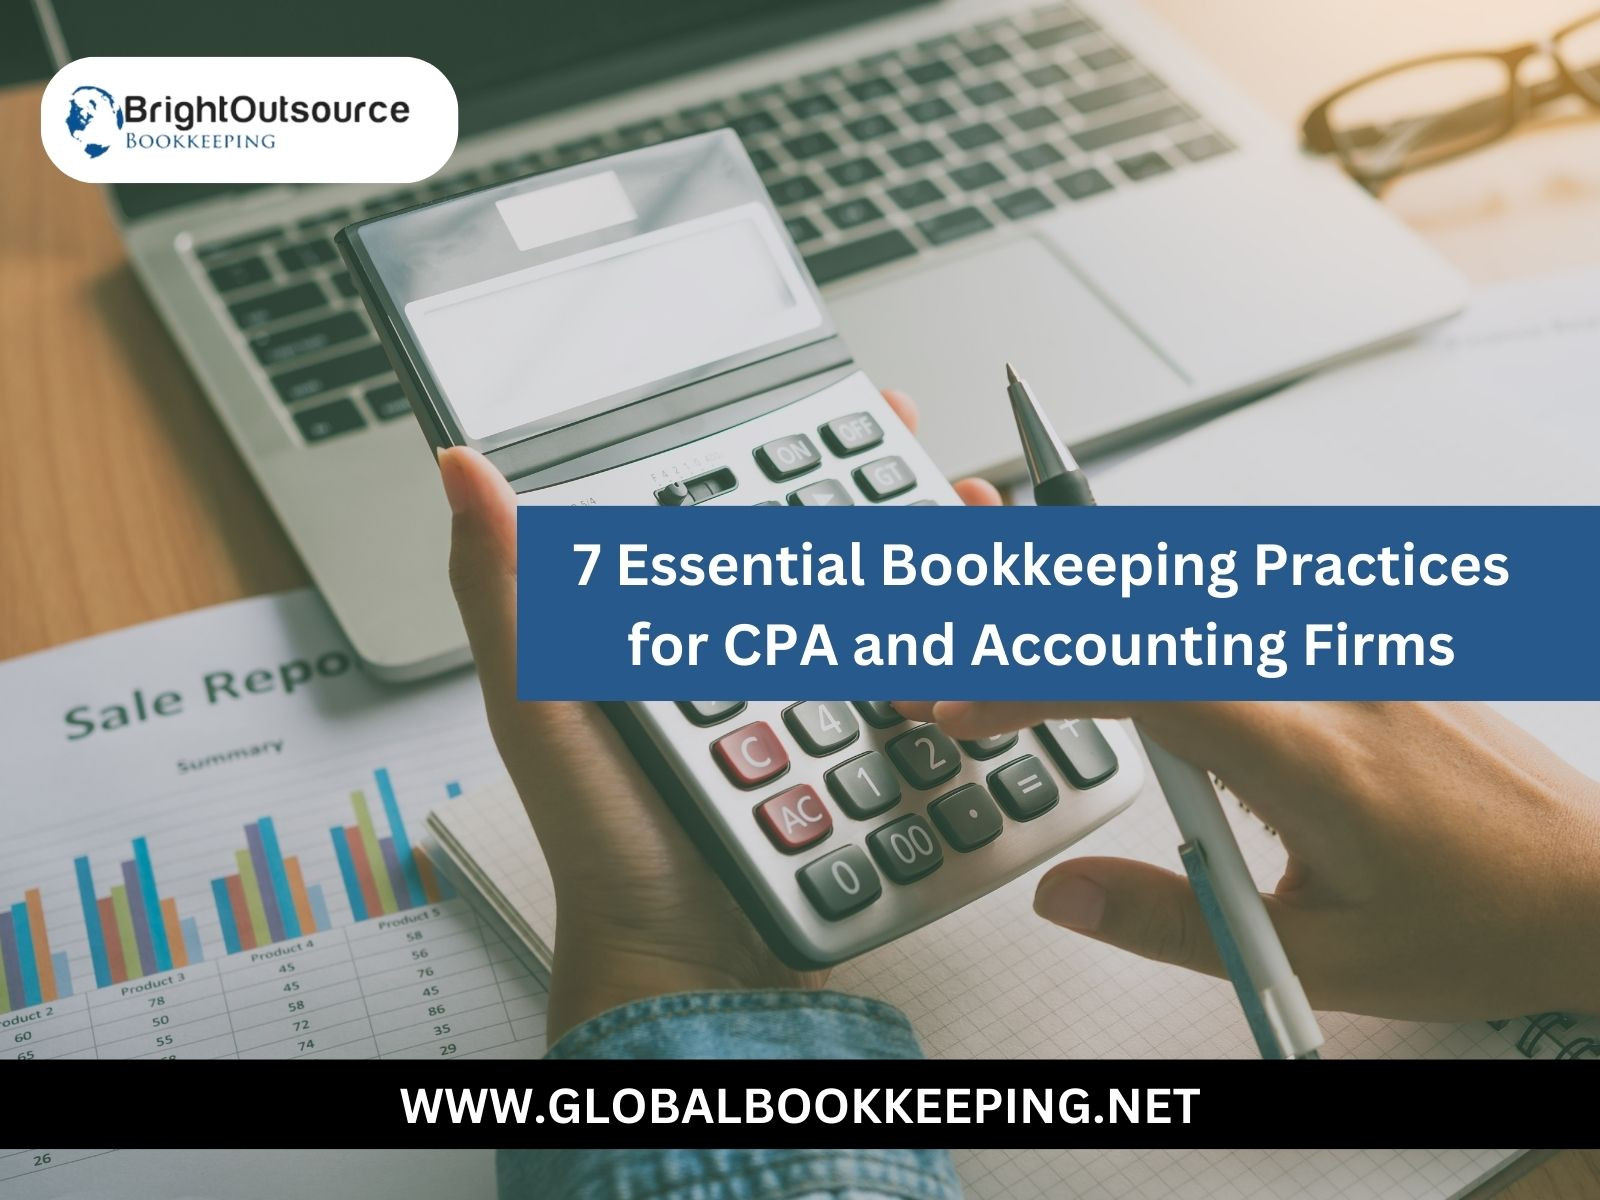 7 Essential Bookkeeping Practices for CPA and Accounting Firms